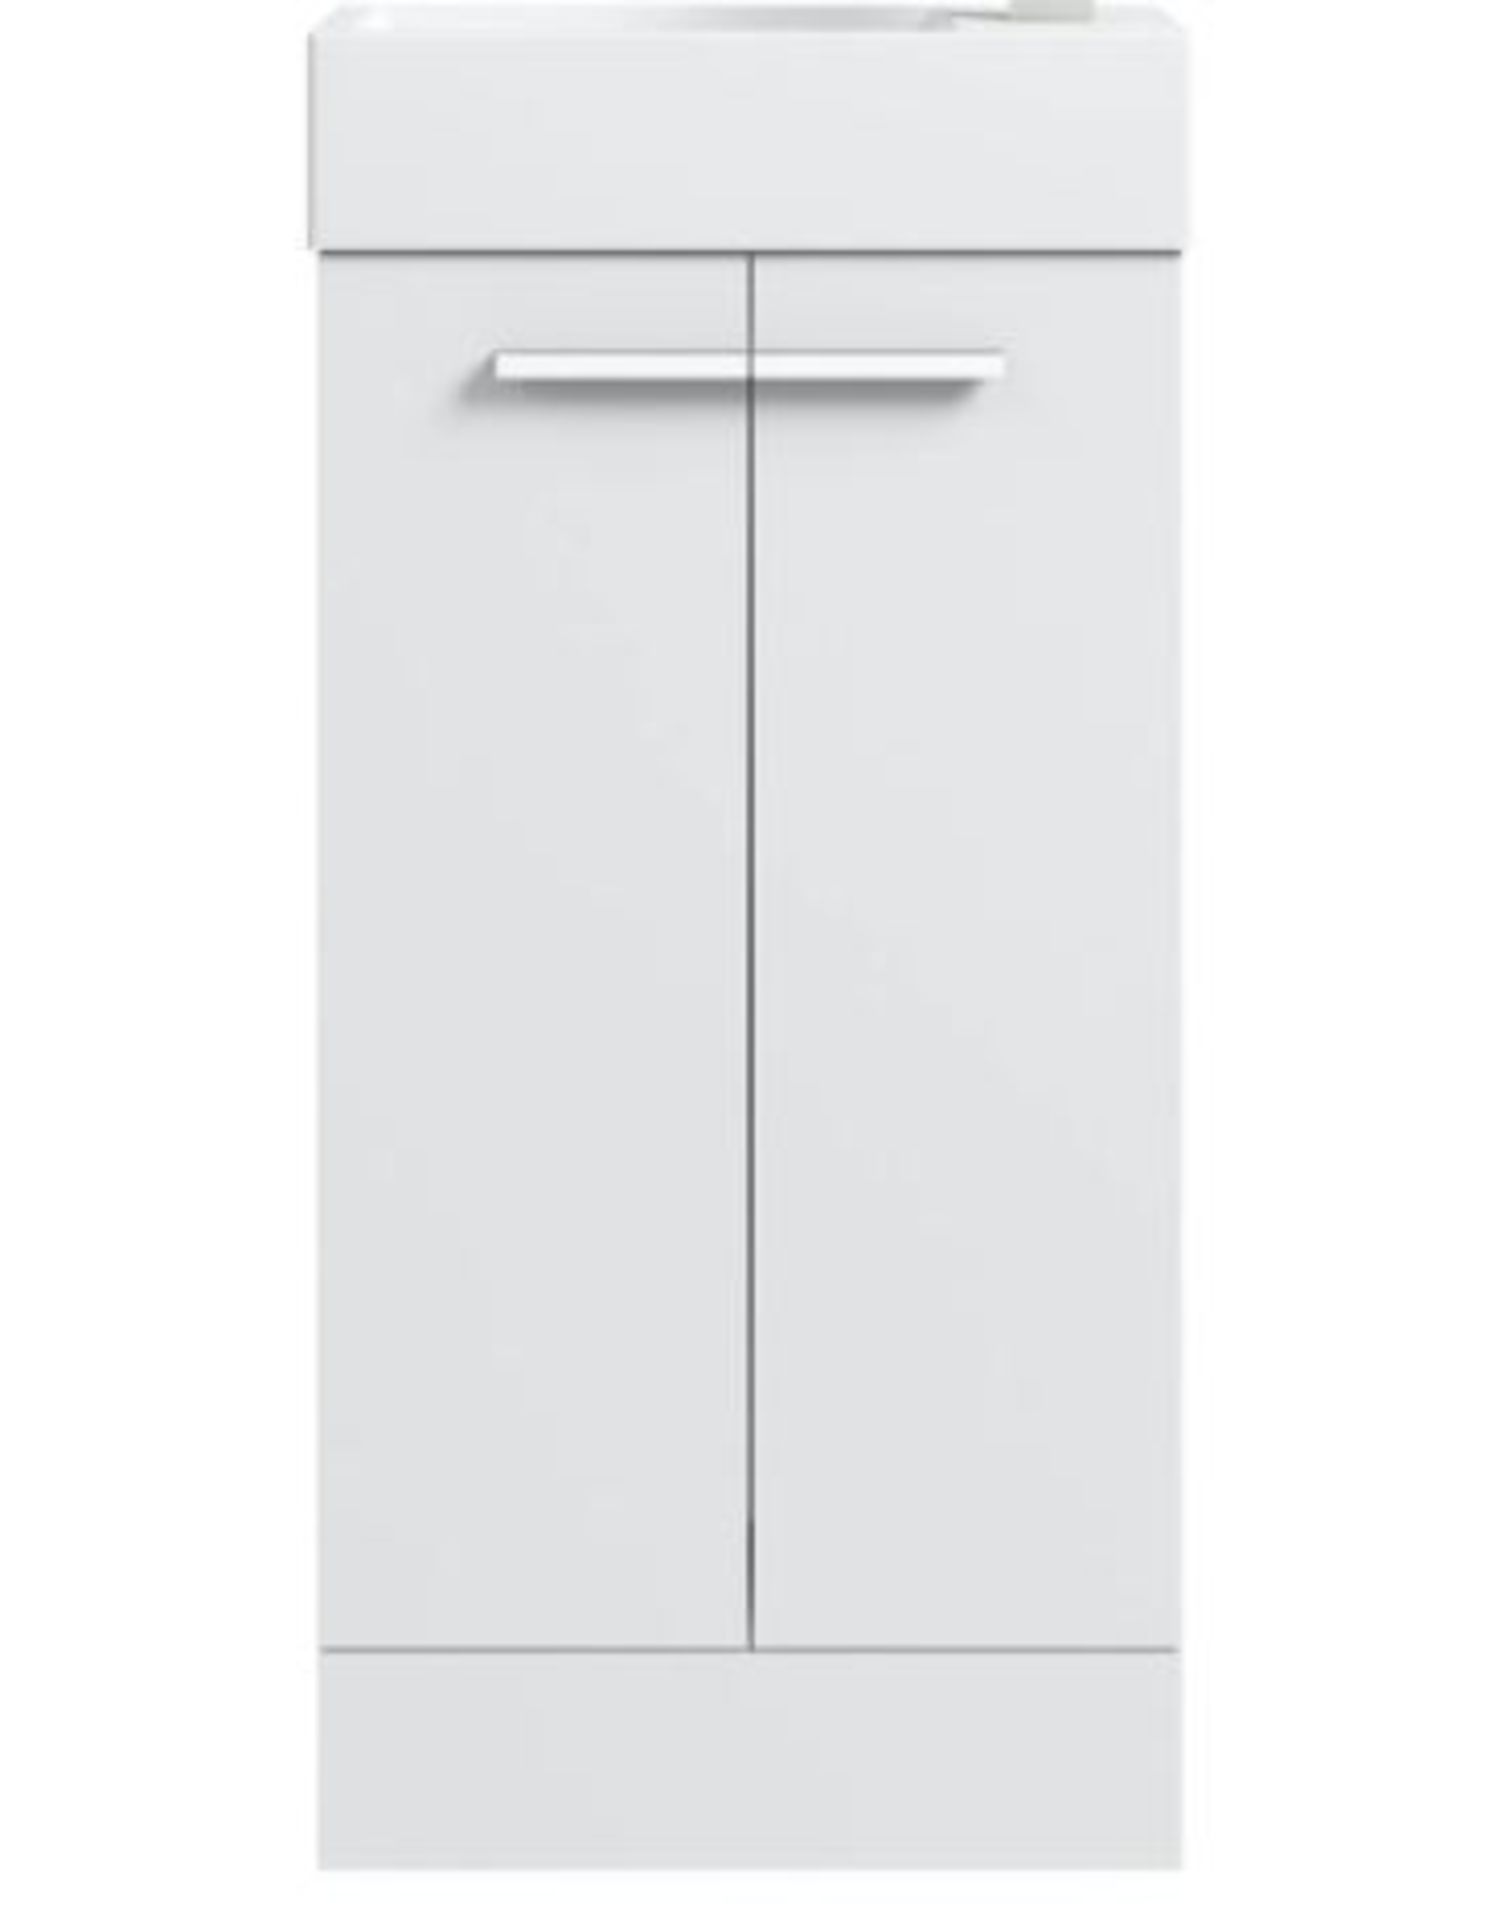 Clarity Compact White Floor Standing Unit with Resin Basin RRP £159 (MD725FBGWV) - Image 4 of 6